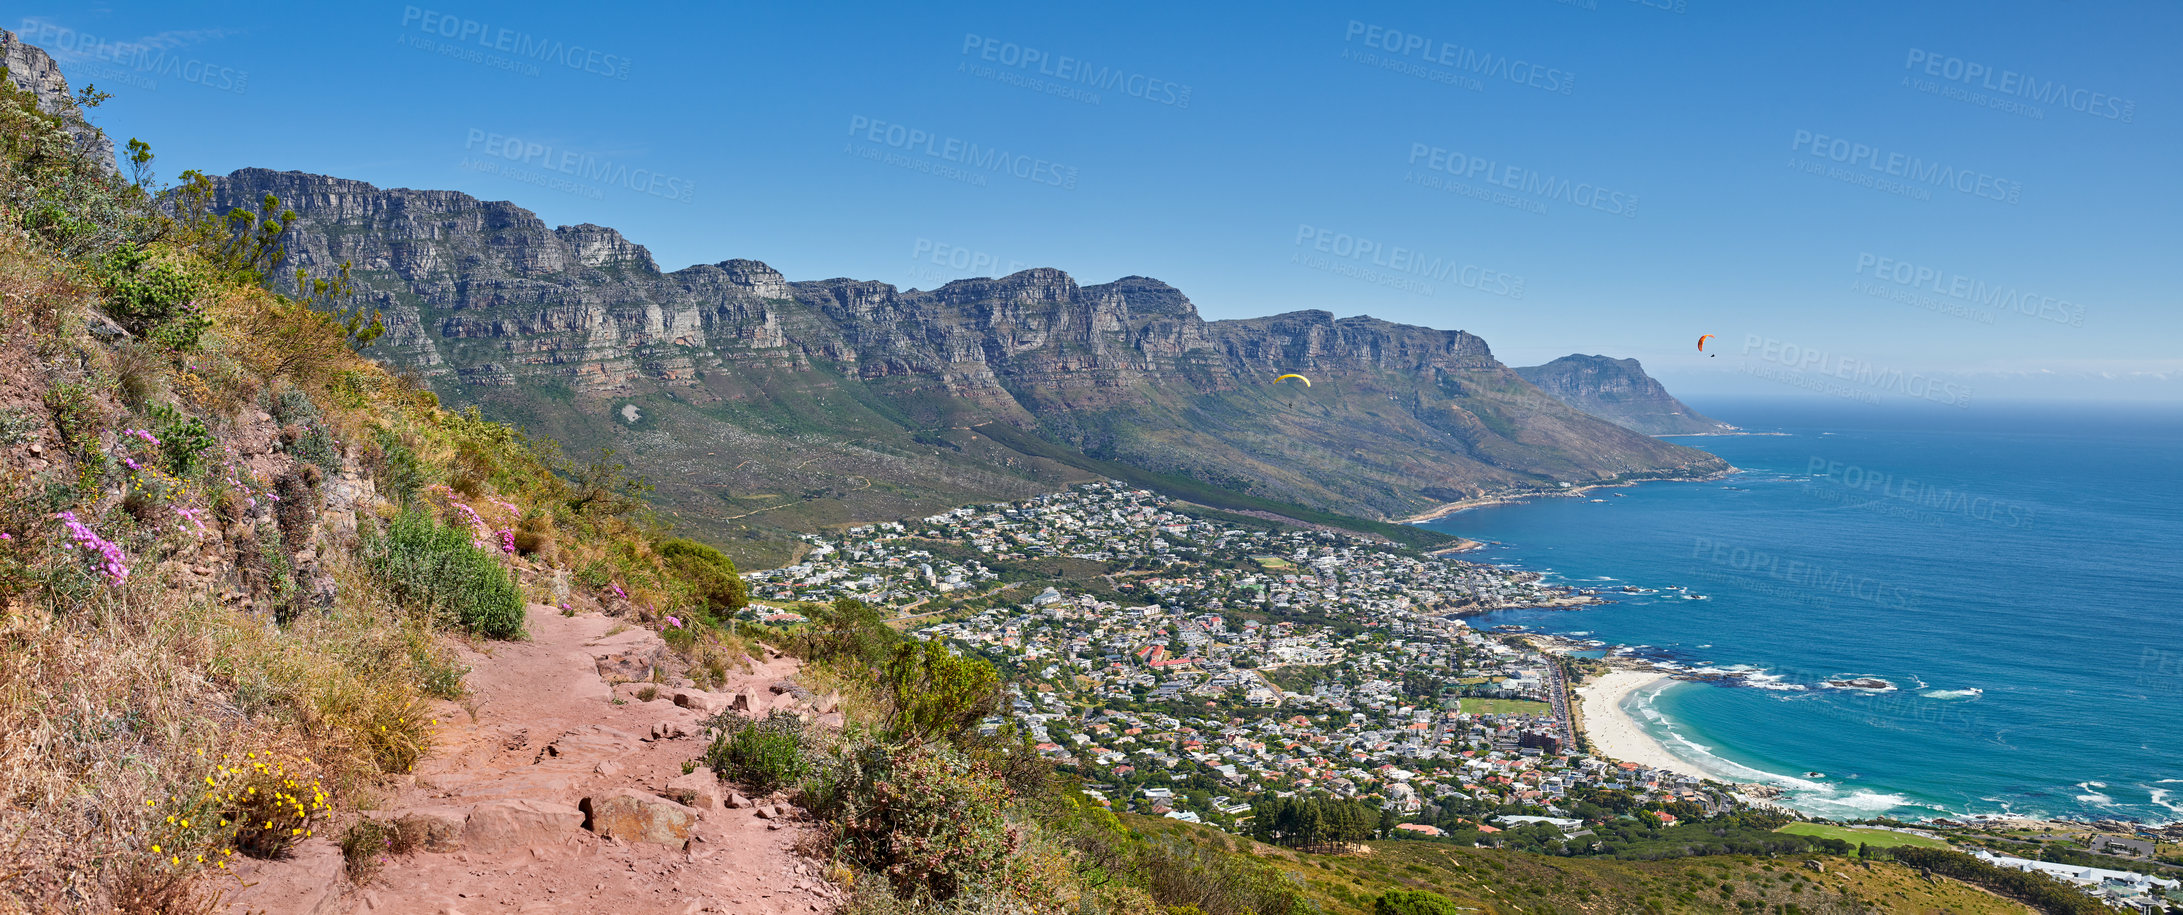 Buy stock photo Scenic hiking trail along Table Mountain with beautiful views of a coastal city against a blue sky background. Panoramic of a lush landscape by the sea around an iconic landmark to explore and travel